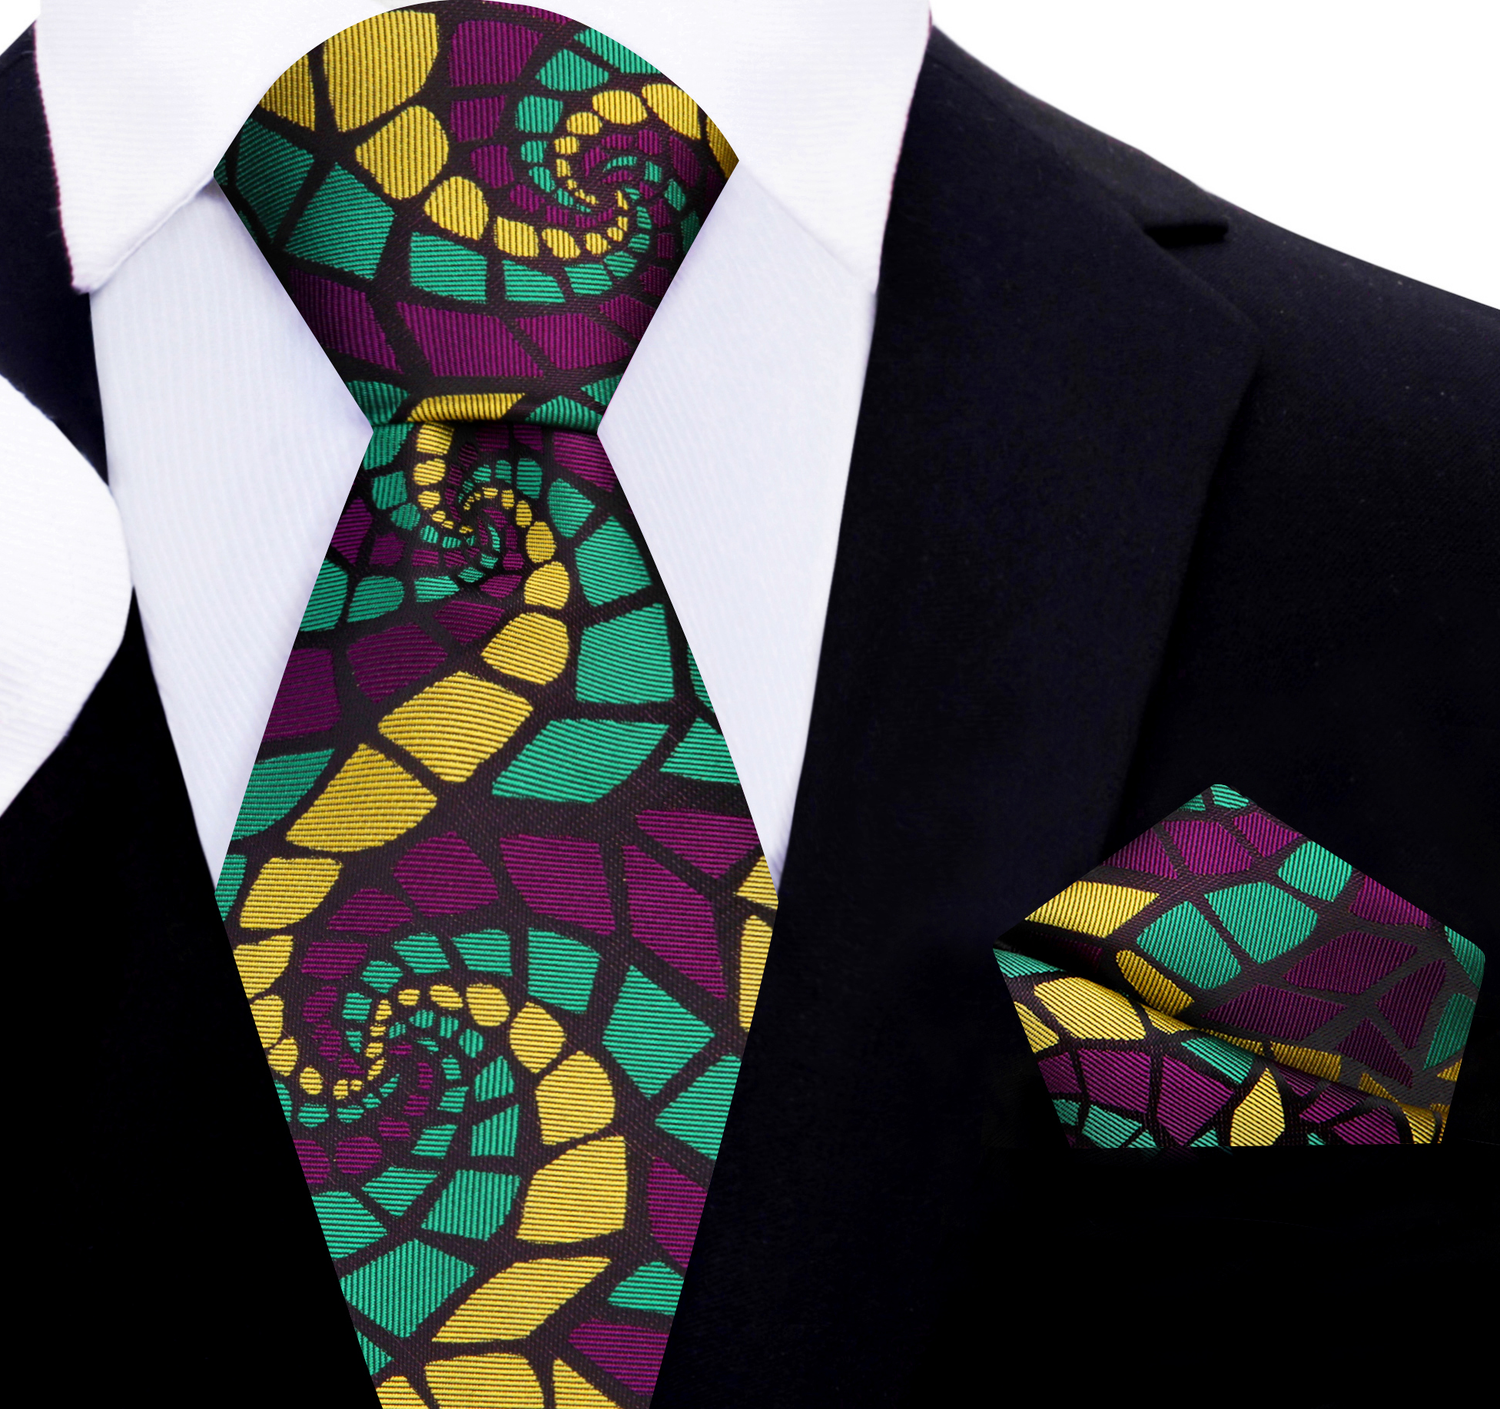 A Purple, Green, Gold Abstract Swirl Tie, Pocket Square